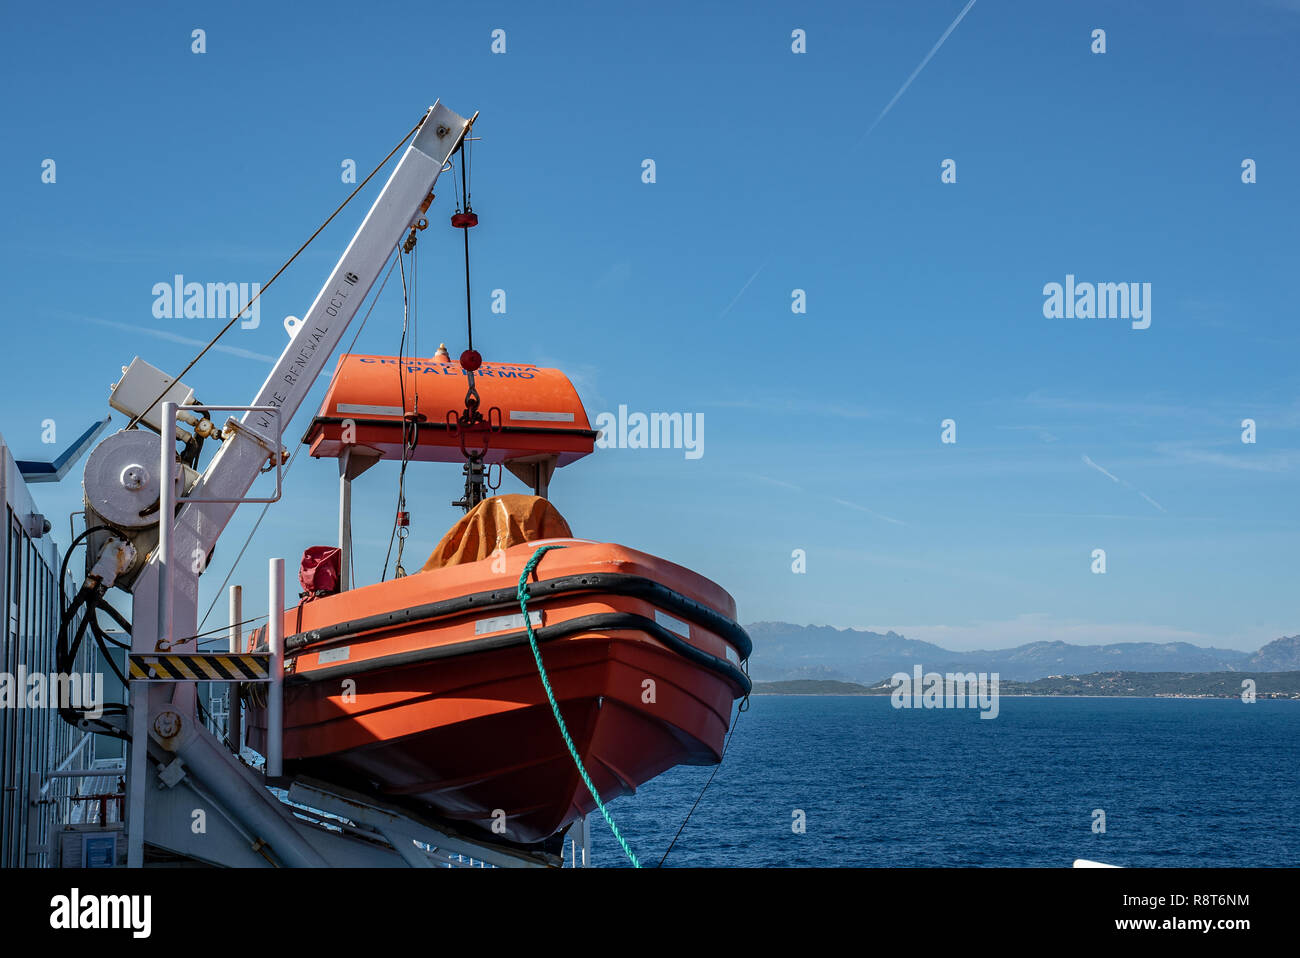 Red rescue boat Lifeboat stands on deck of a ferry Stock Photo